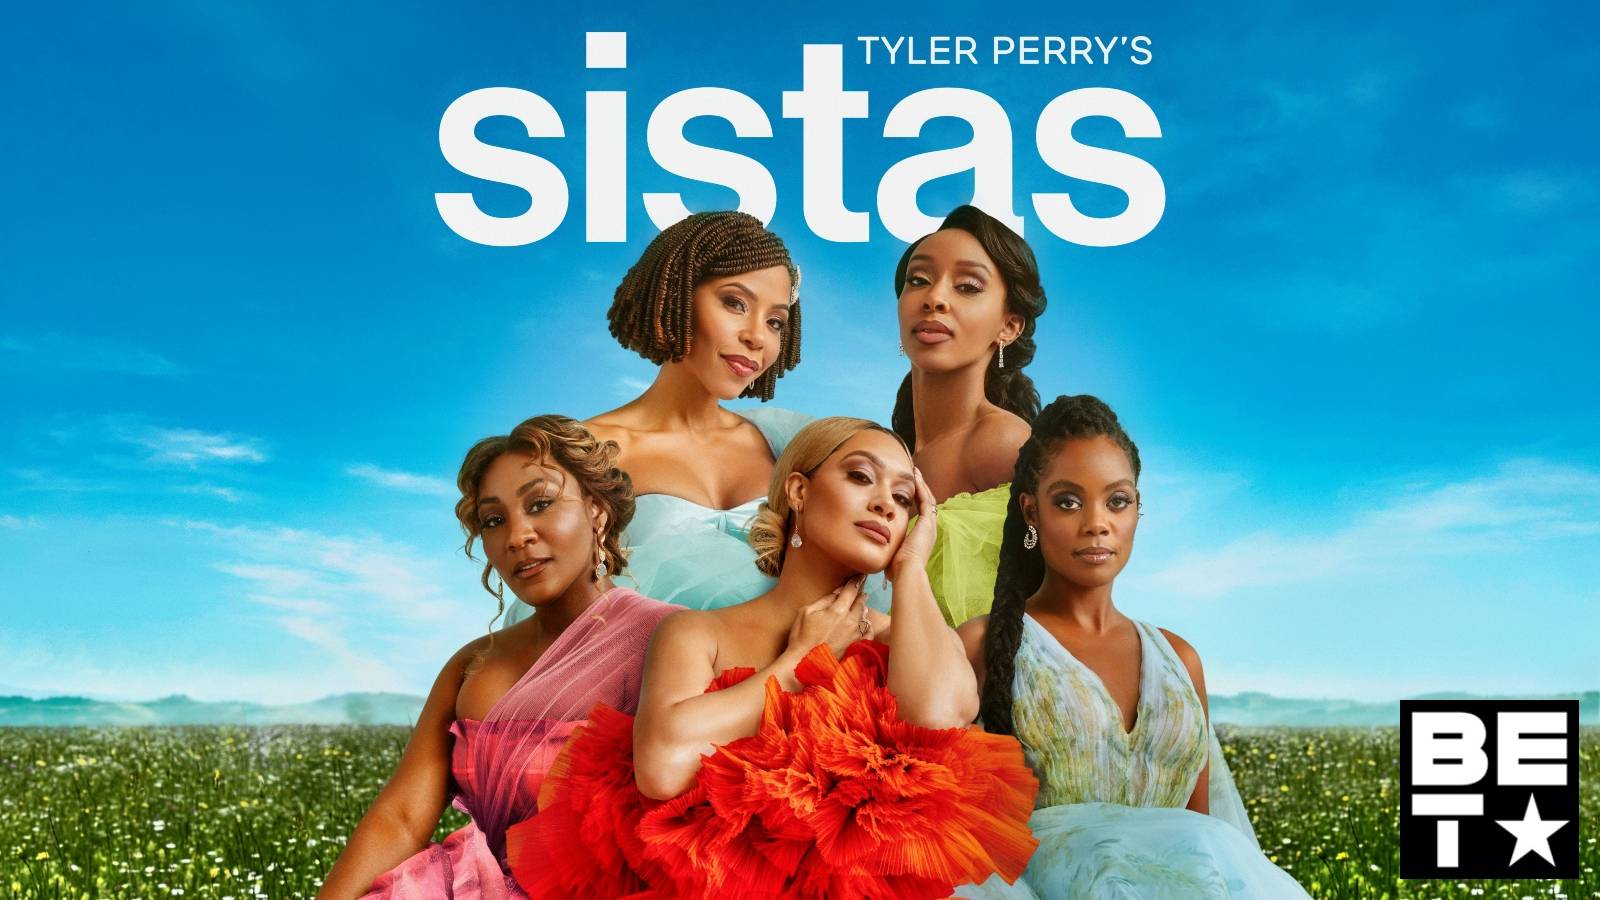 The cast of Tyler Perry presents Sistas